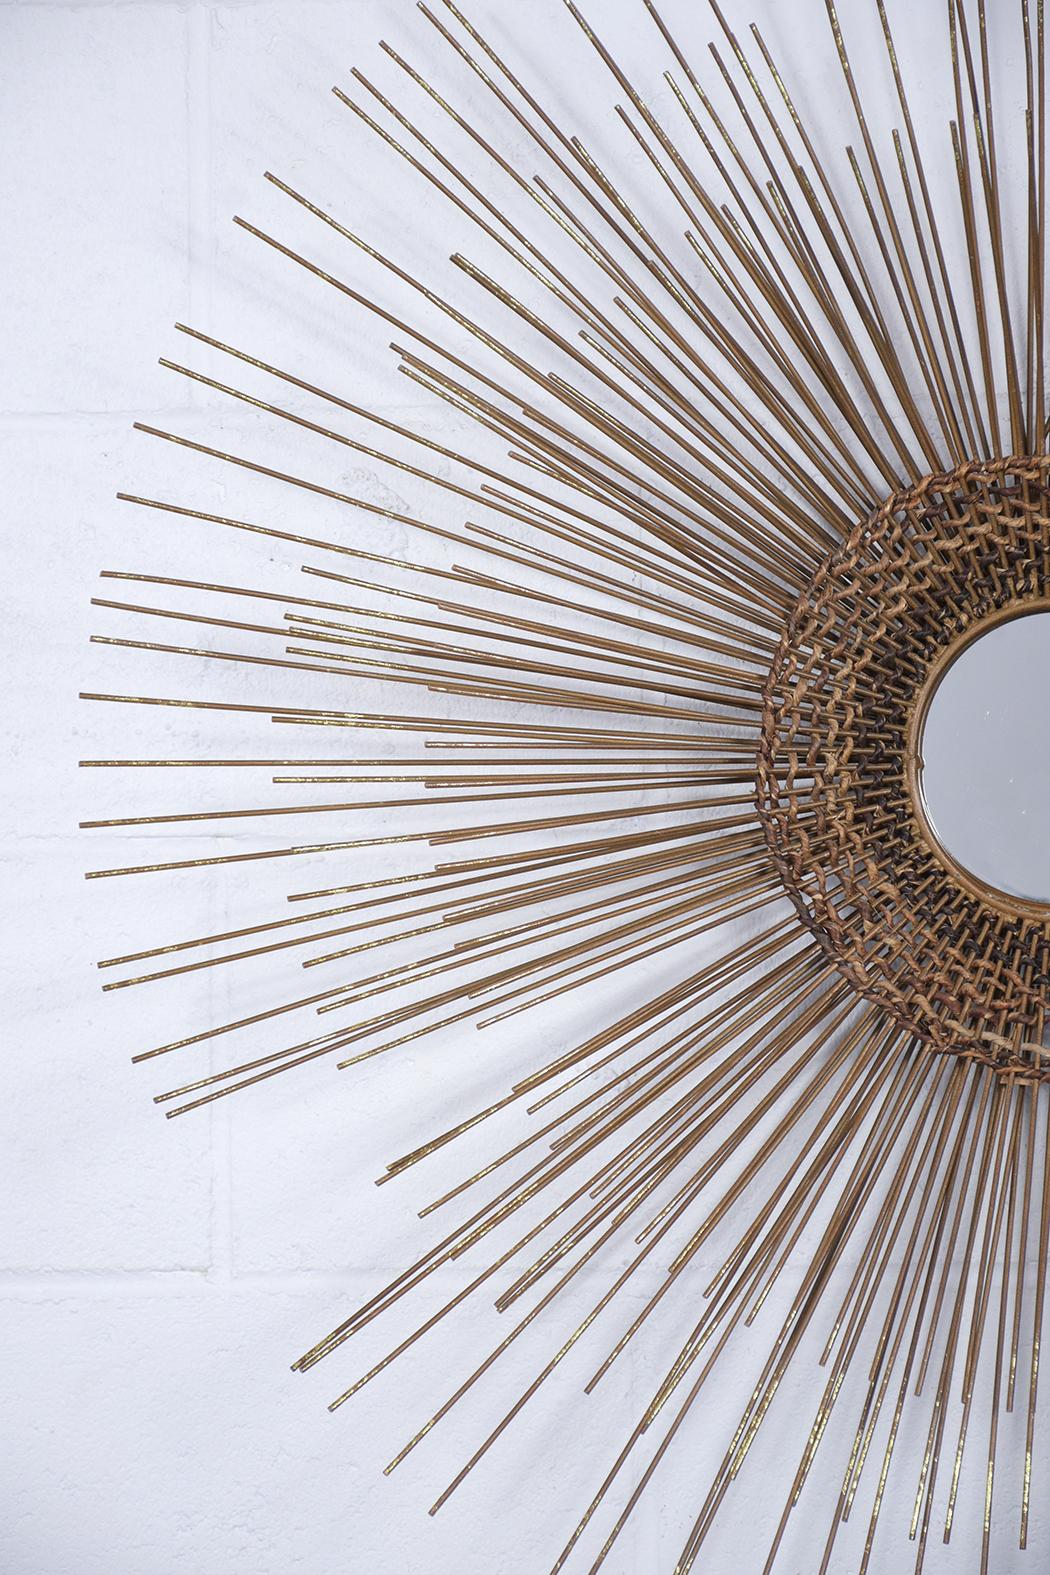 piece that effortlessly blends style and functionality. This mirror features its original fully reflective mirror insert, ensuring clarity and a pristine reflection. Its unique woven caning design around the mirror adds a touch of artistic flair and